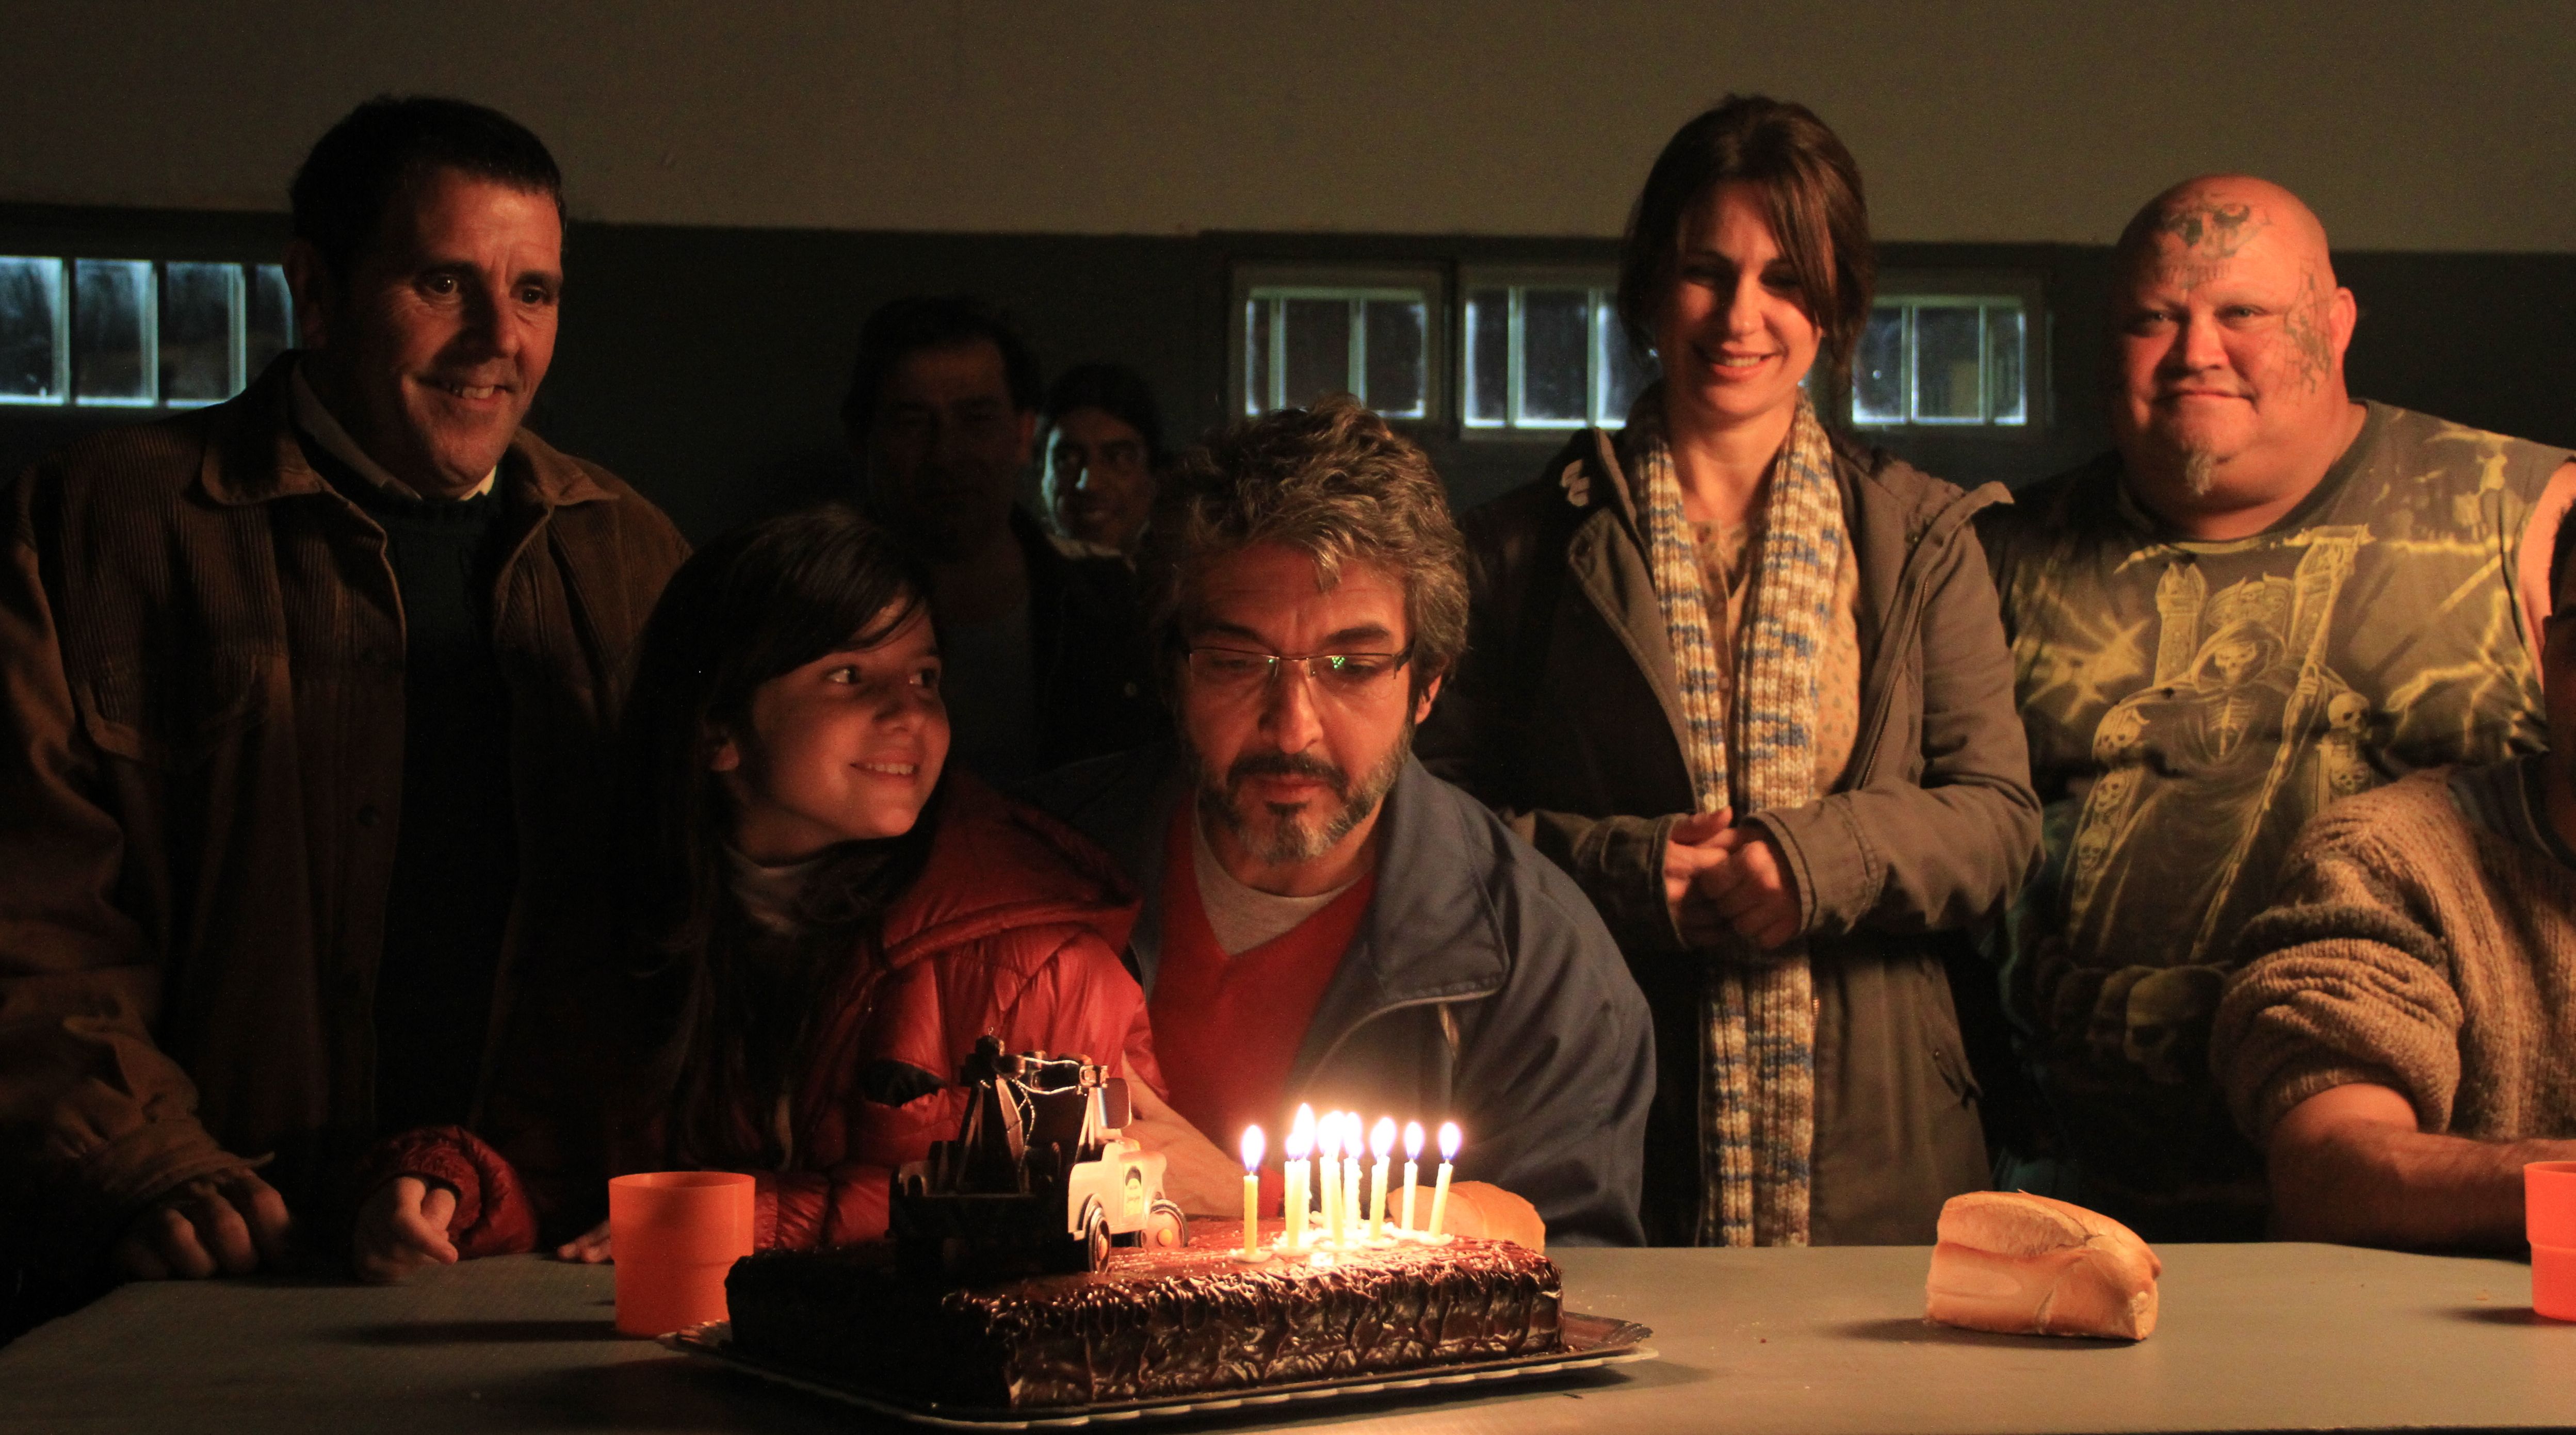 Ricardo Darín blows out the candles as Simón Fisher in Wil